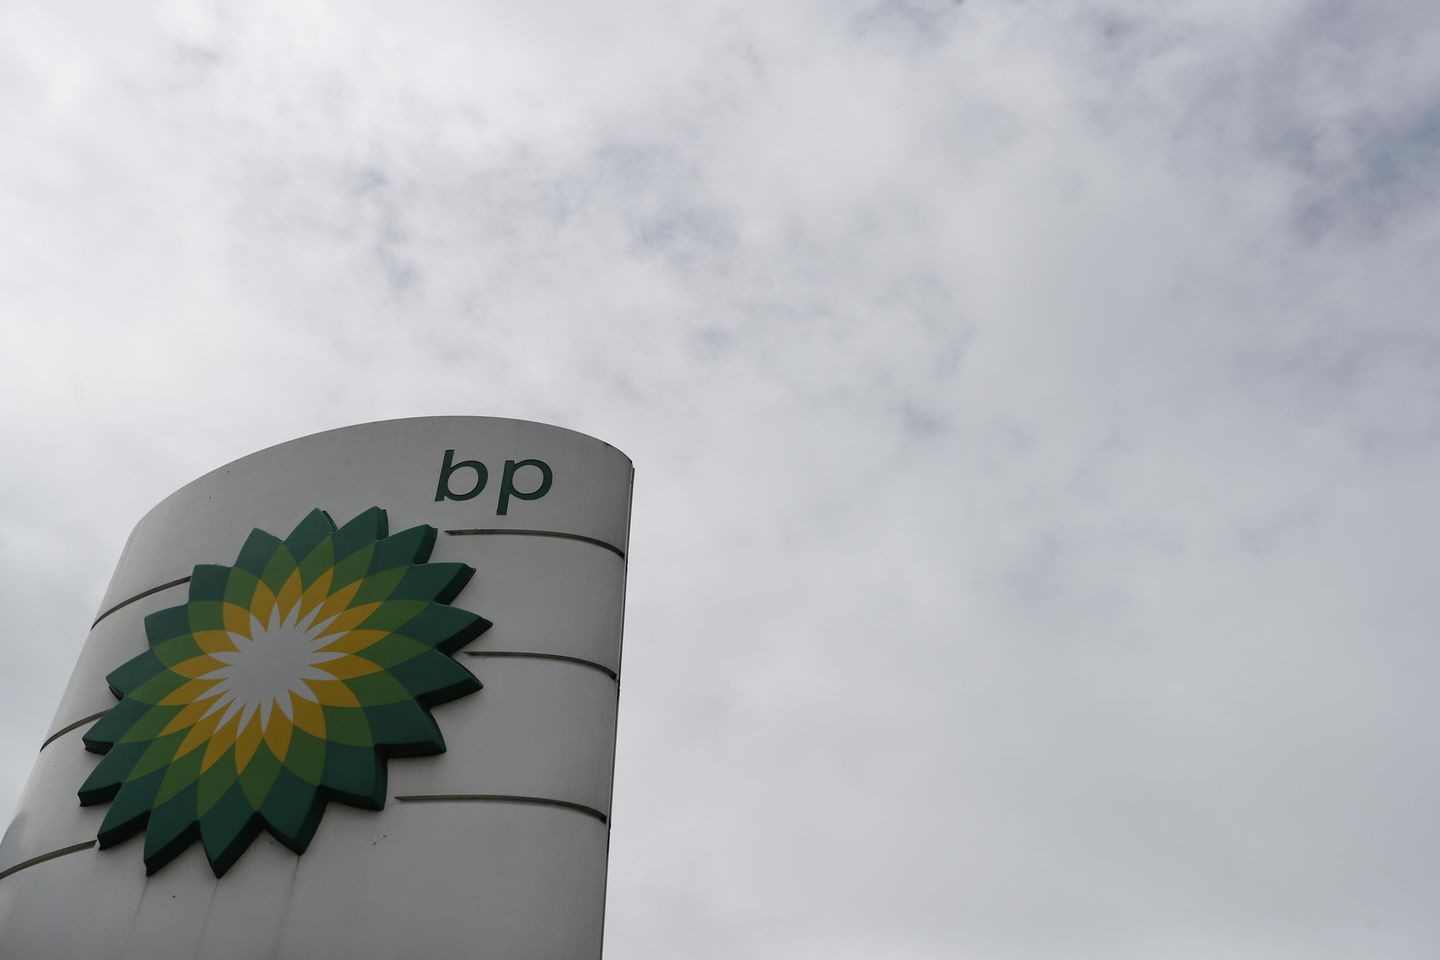 Federal investigation into 2022 Ohio refinery explosion finds BP at fault